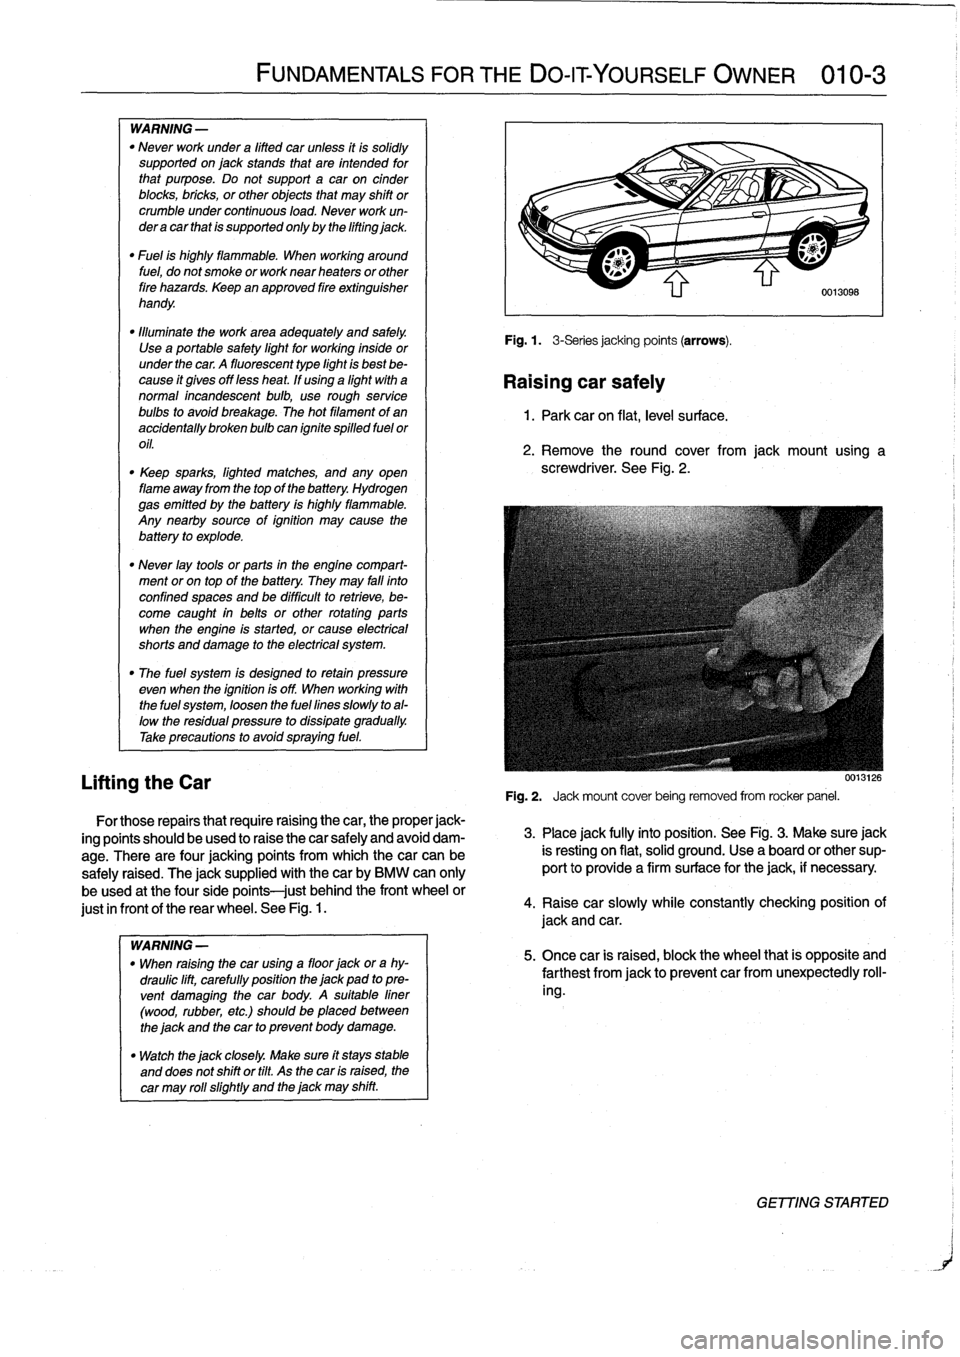 BMW 318i 1992 E36 Workshop Manual 
WARNING
-

"
Never
work
under
a
lifted
car
unless
it
is
solidly
supported
on
jack
stands
that
are
intended
for
that
purpose
.
Do
not
support
a
car
on
cinder
blocks,
bricks,
or
other
objects
that
may
